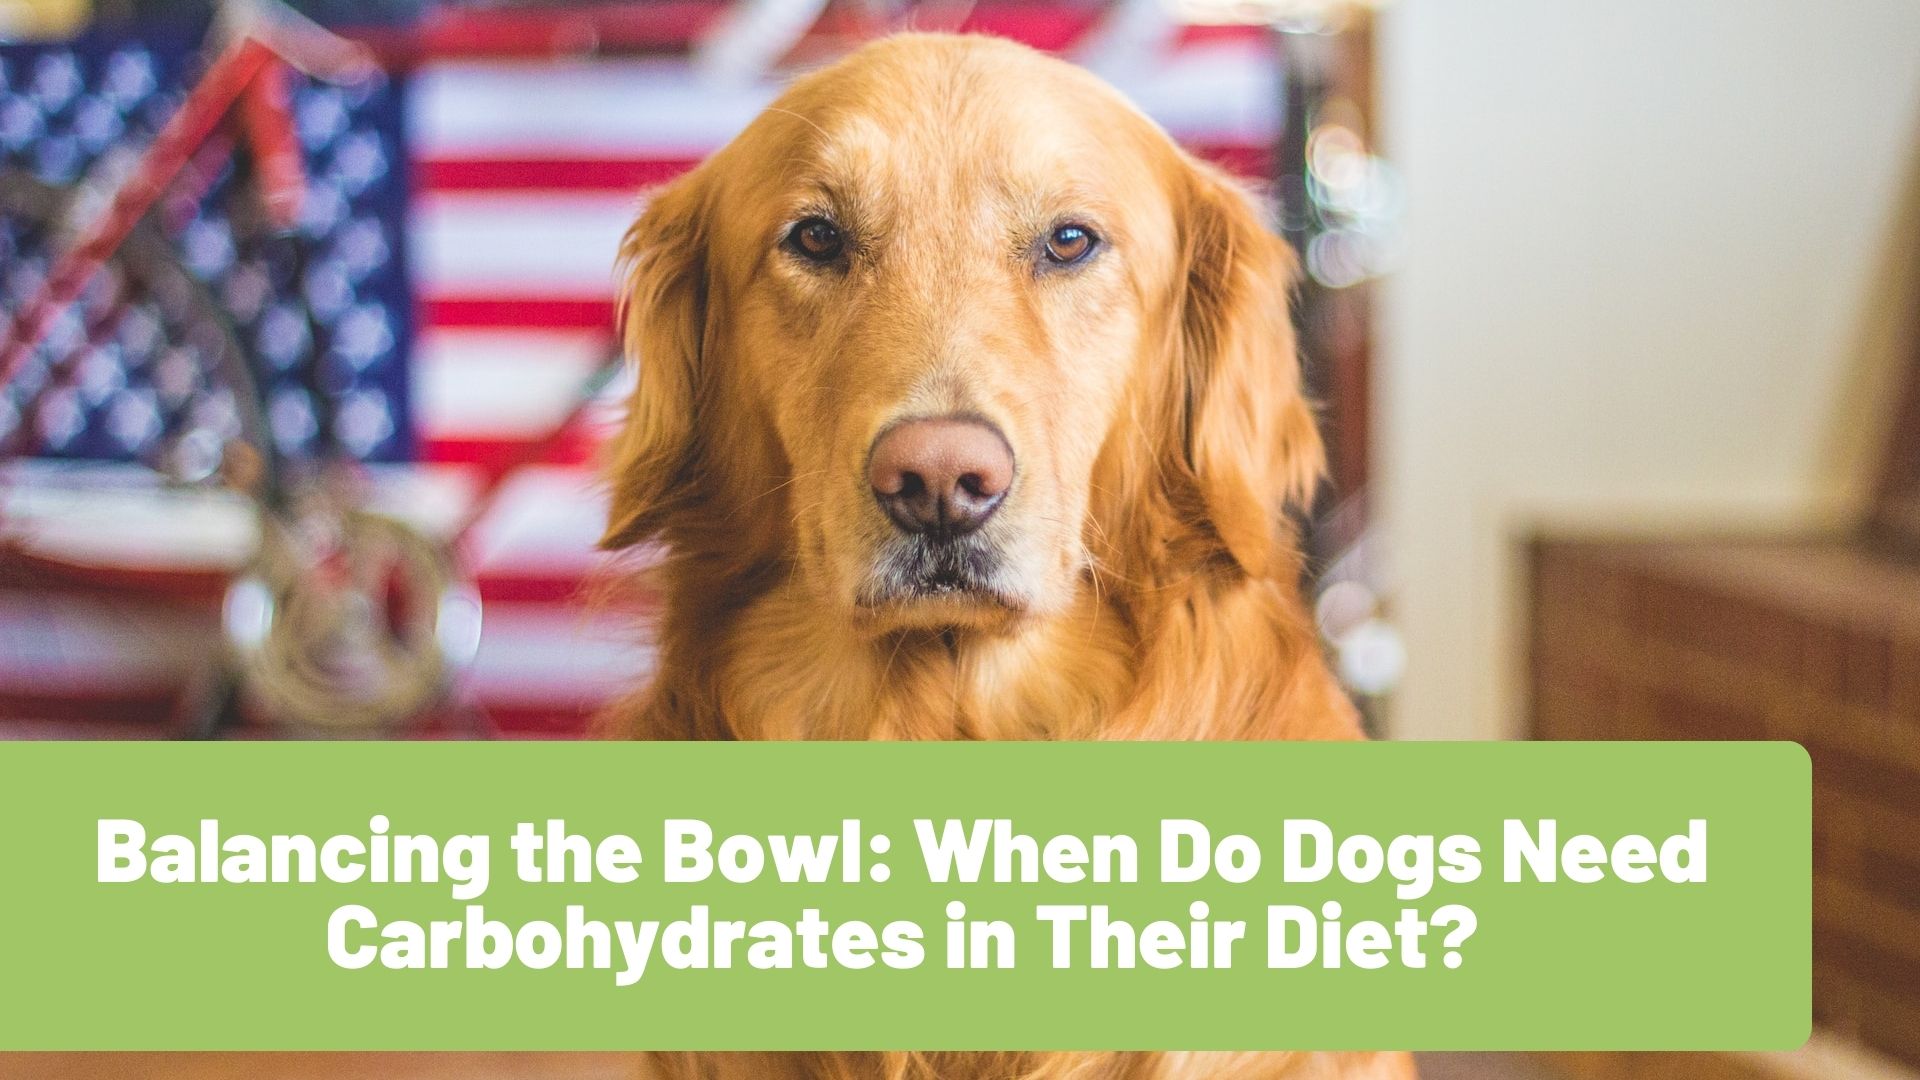 Balancing the Bowl: When Do Dogs Need Carbohydrates in Their Diet? - RawOrigins.pet - The Raw Dog Food Company